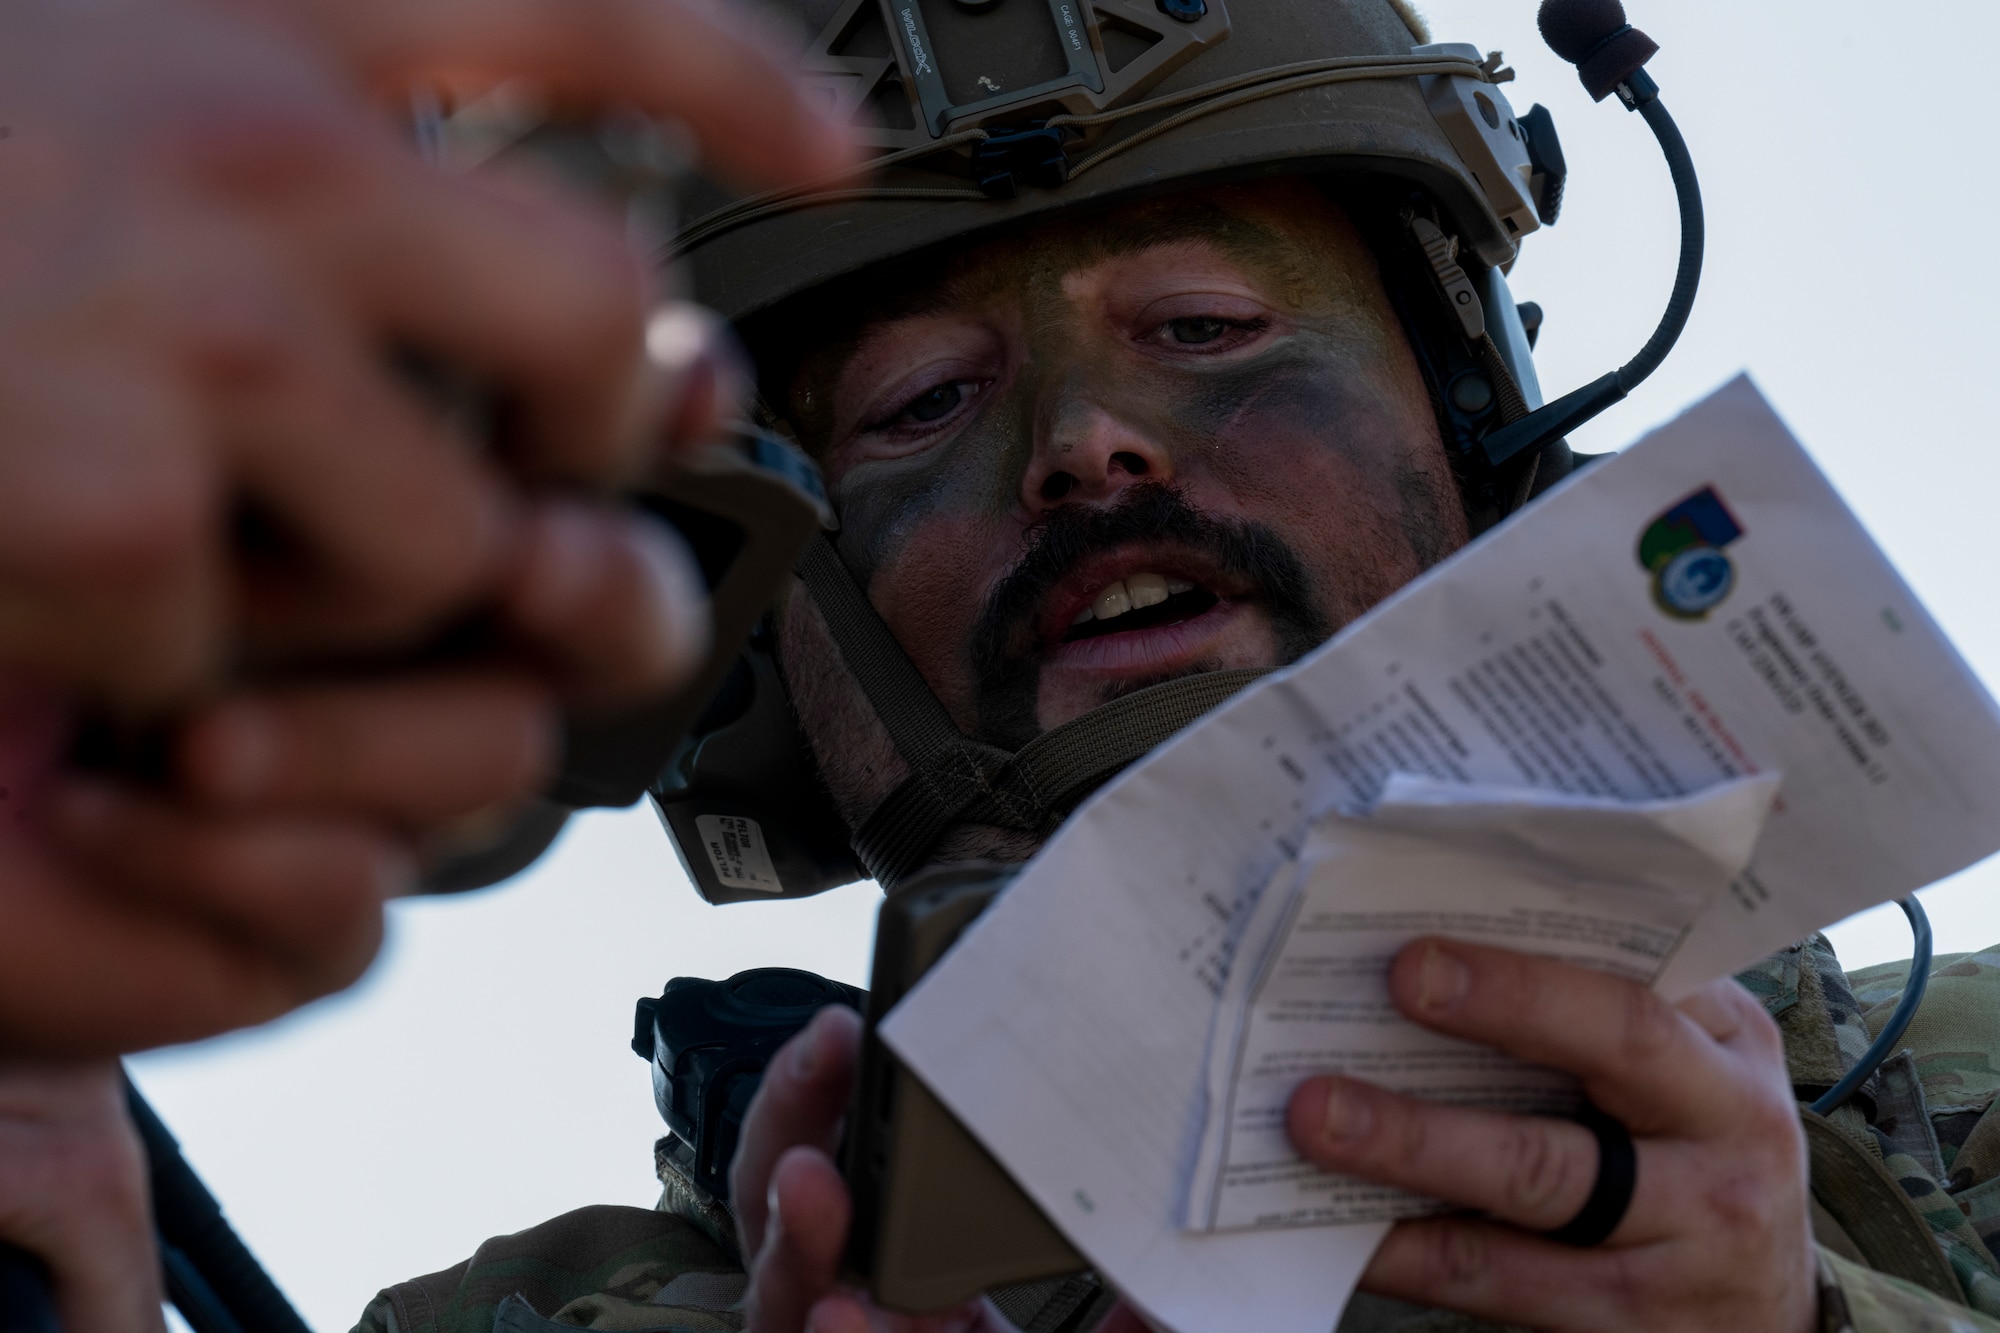 U.S. Air Force Staff Sgt. Taylor Beams, a 621st Mobility Support Operations Squadron enlisted air/ground liason element (EAGLE) team member, inputs exercise information into his Android Tactical Awareness Kit (ATAK) during Exercise SWAMP AVENGER at North Field, South Carolina, May 24, 2023. EAGLEs are postured to rapidly deploy to locations all over the world to assist USAF deployed joint partners and other Major Command forces via stragetic airlift. EAGLEs are also trained leaders in their respective air force speciality codes and are expected to bring critical knowledge and experience from their previous assisngments to quickly embed with any joint partner unit. (U.S. Air Force photo by Staff Sgt. Scott Warner)